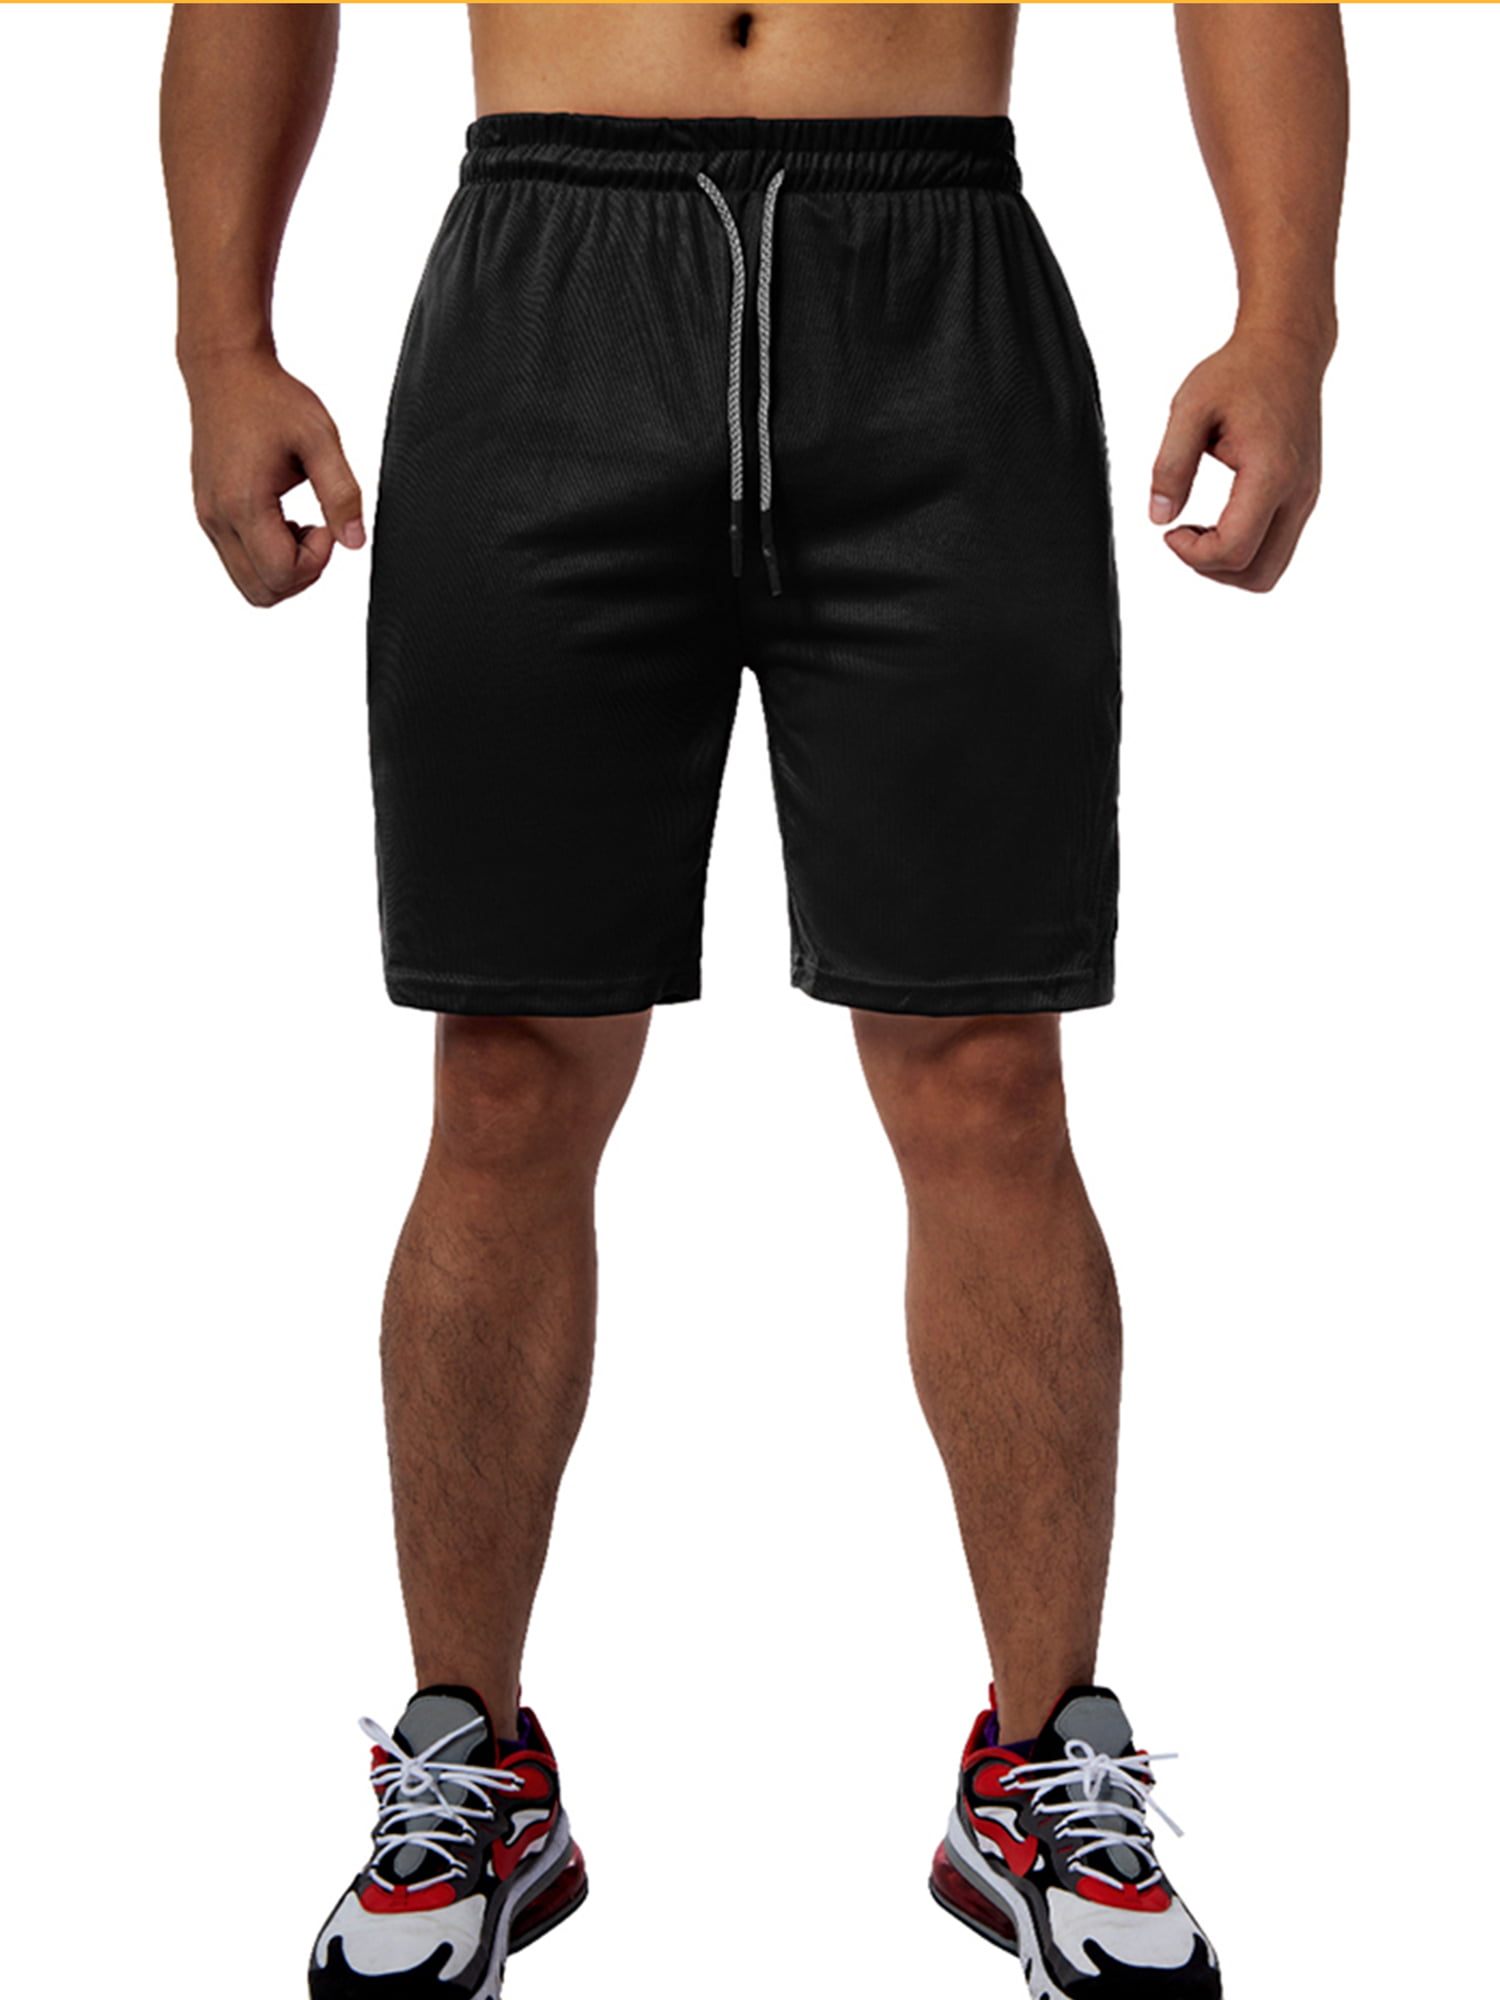 Basketball Gym X31 Sports Mens Athletic Shorts with Zipper Pockets for Running